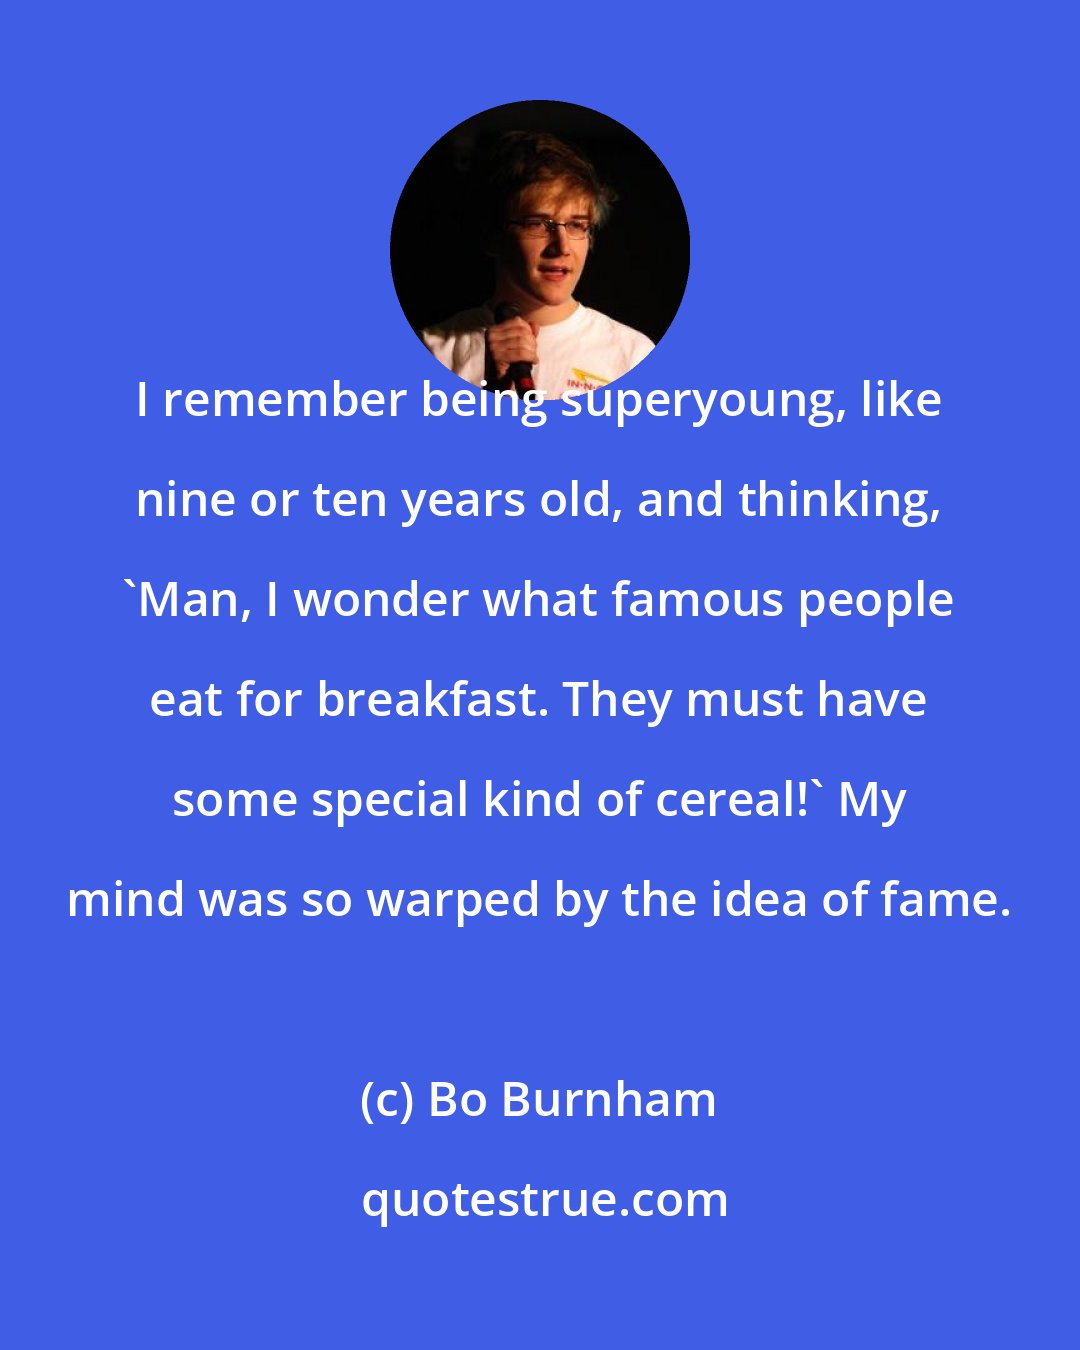 Bo Burnham: I remember being superyoung, like nine or ten years old, and thinking, 'Man, I wonder what famous people eat for breakfast. They must have some special kind of cereal!' My mind was so warped by the idea of fame.